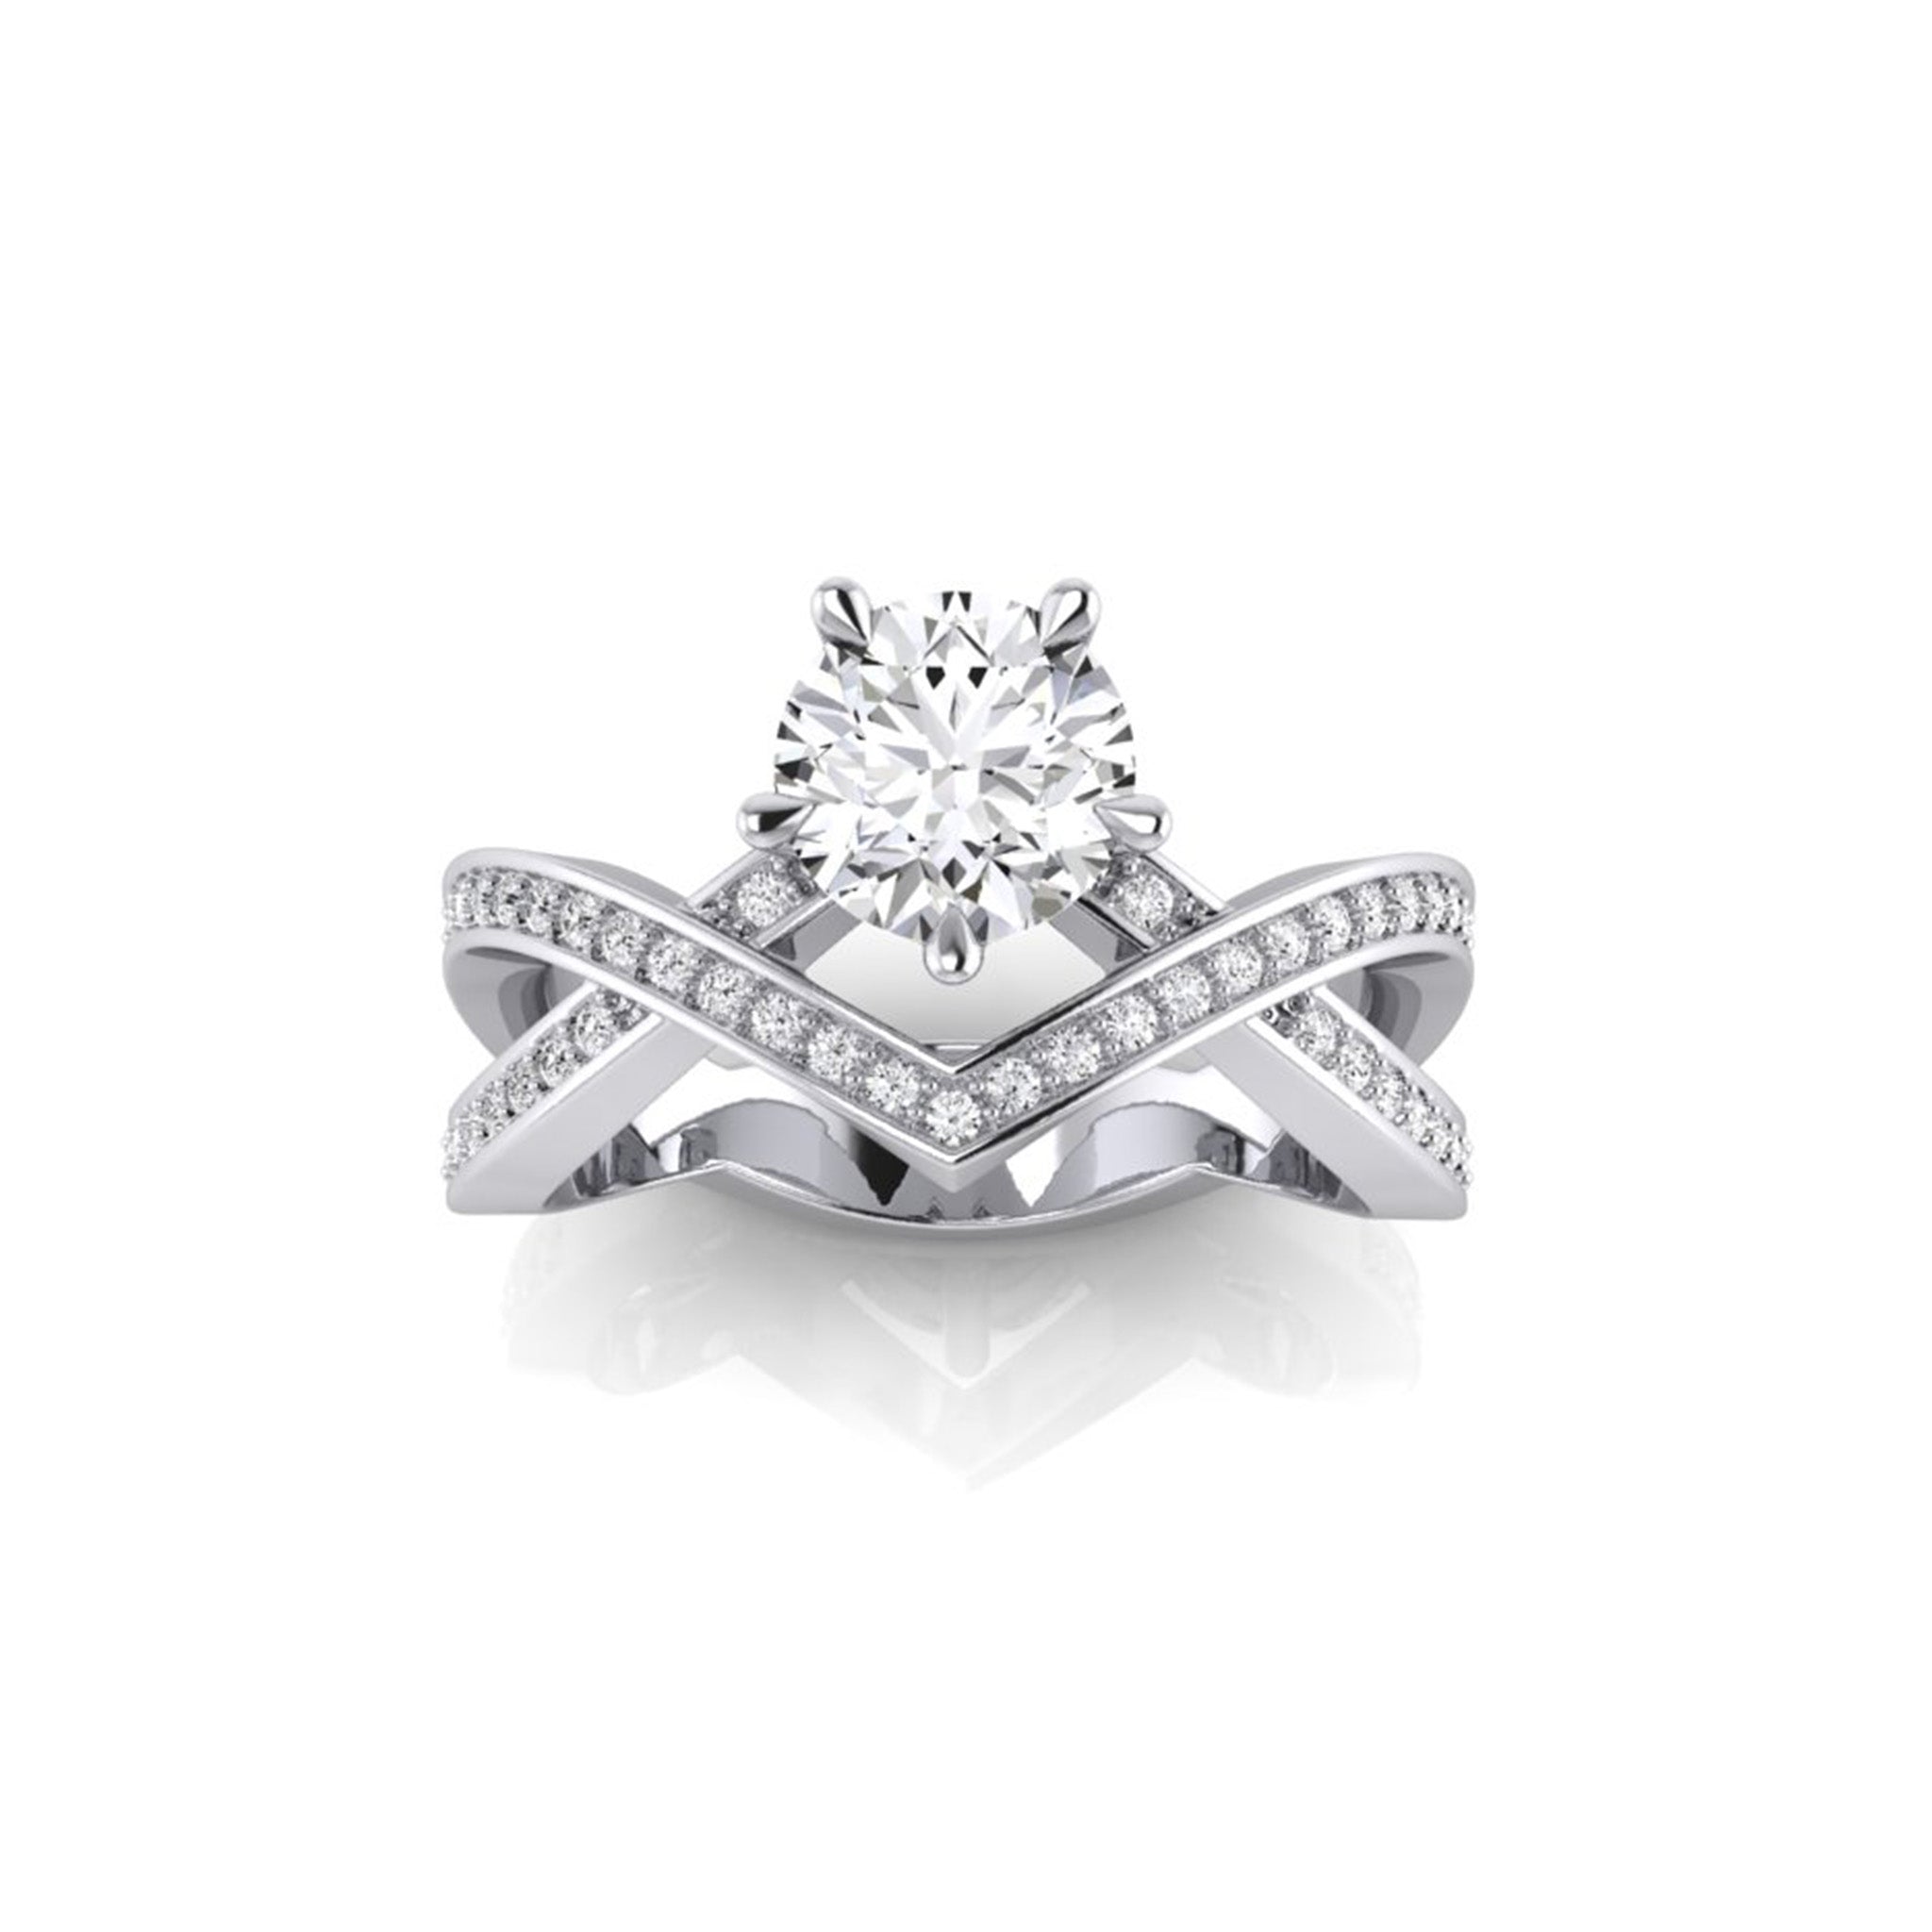 Find Your Perfect Engagement Ring - Rosendorff Diamond Jewellers